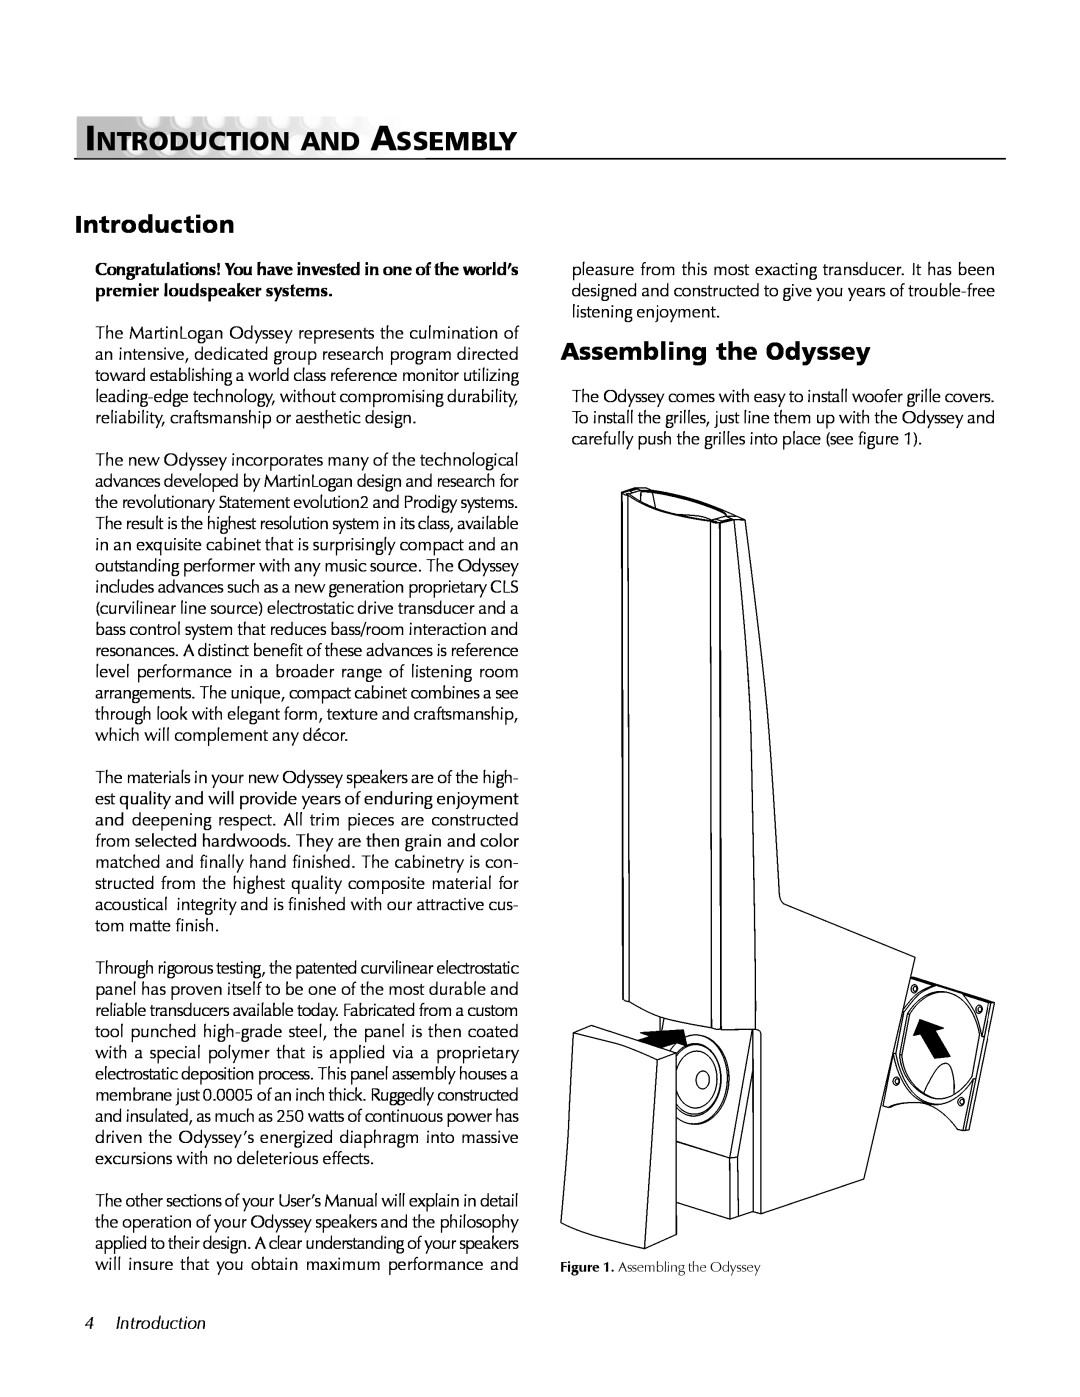 MartinLogan user manual Introduction And Assembly, Assembling the Odyssey, 4Introduction 